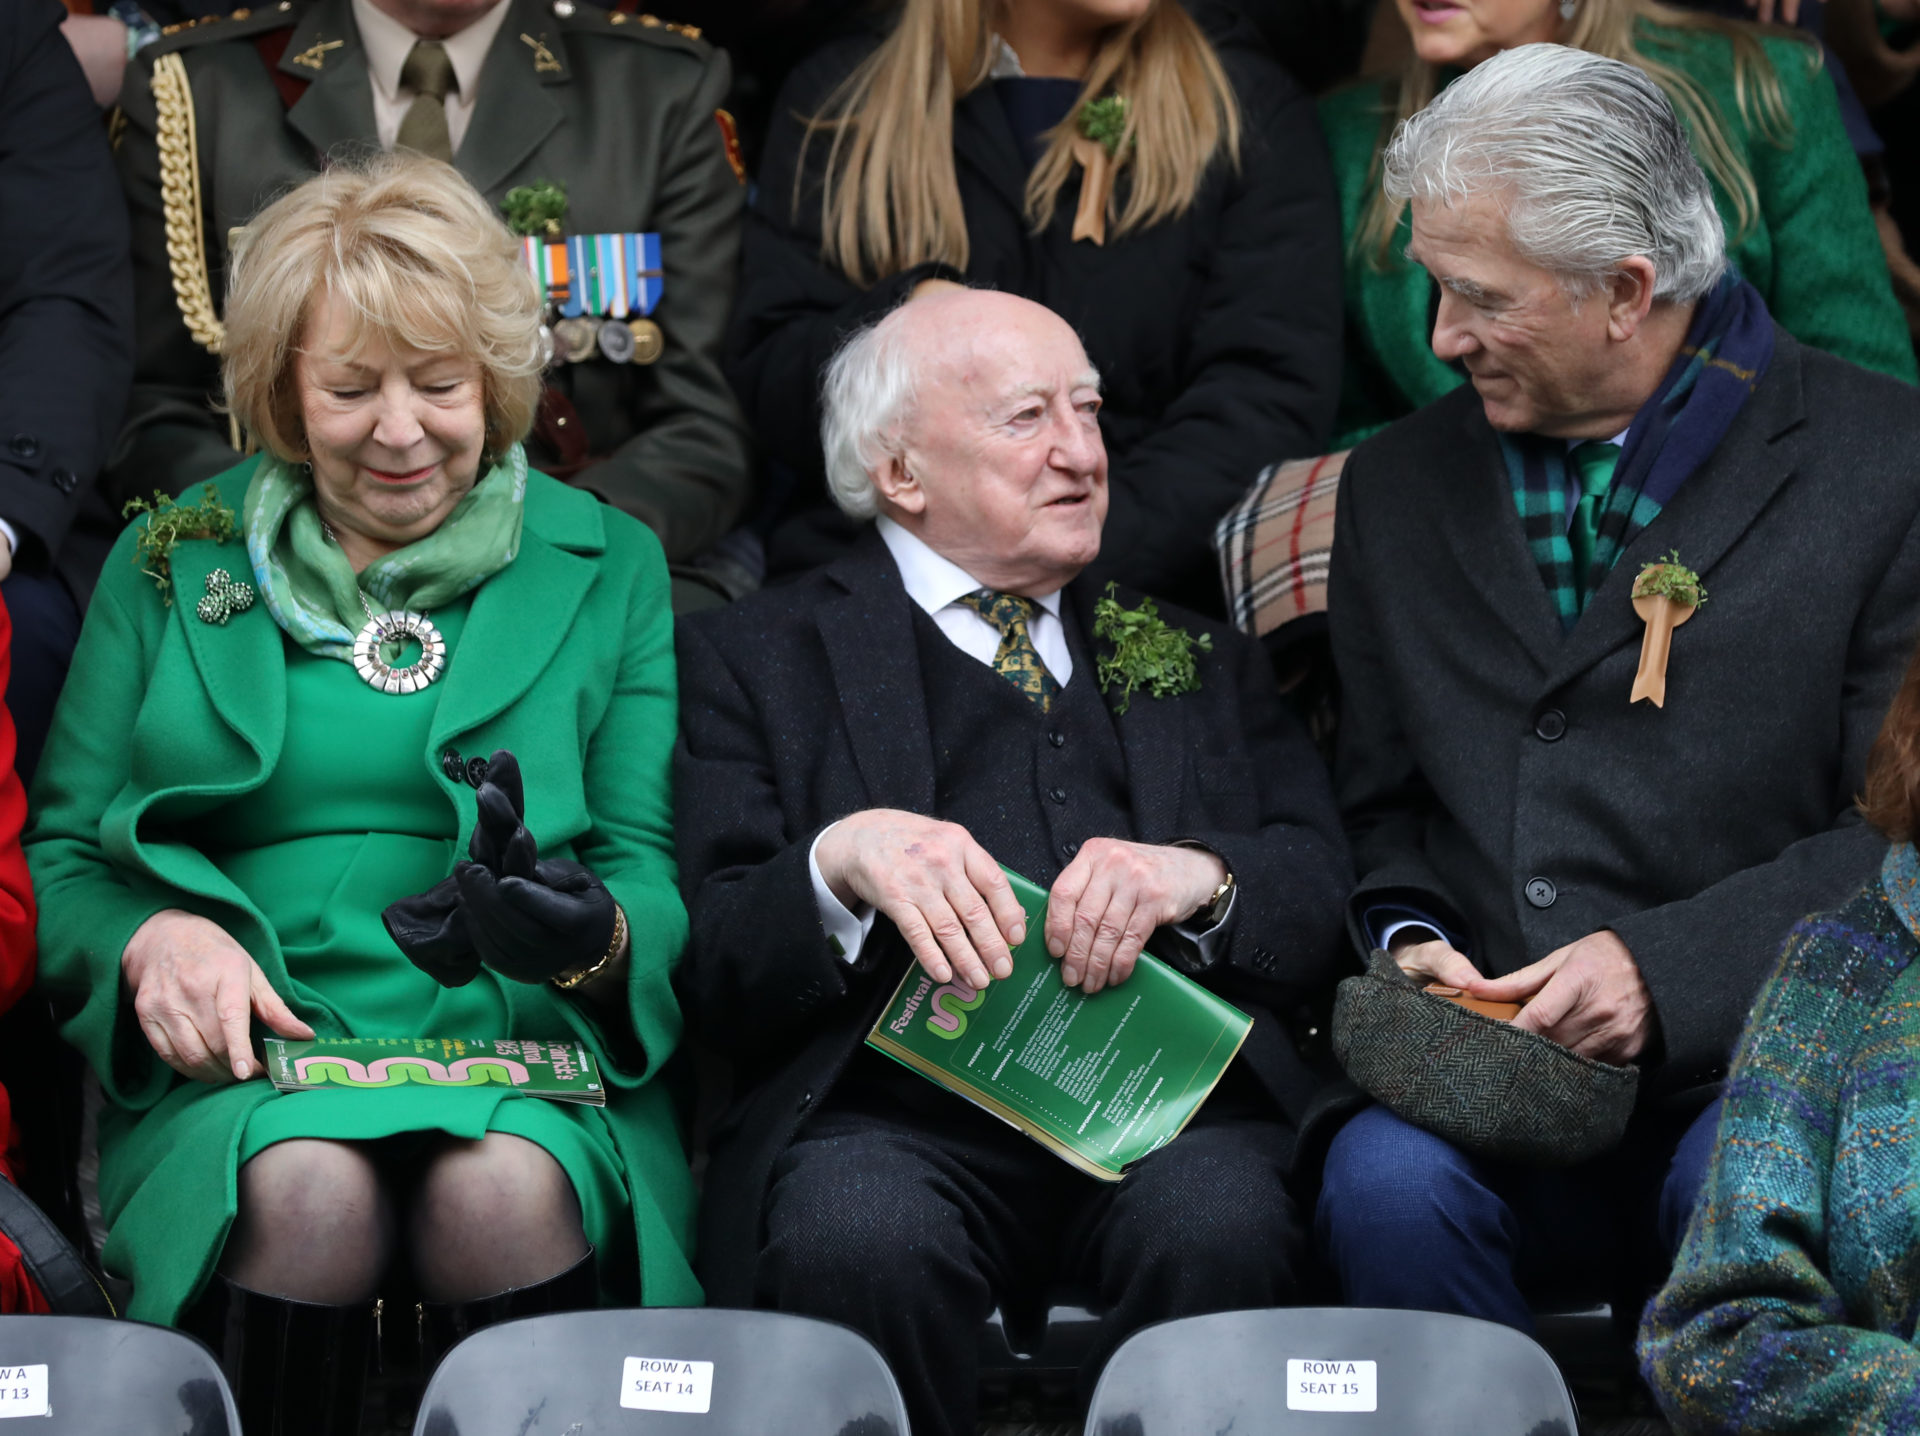 President Michael D Higgins with his wife Sabina and Dallas Television star Patrick Duffy at the Saint Patricks Day Festival